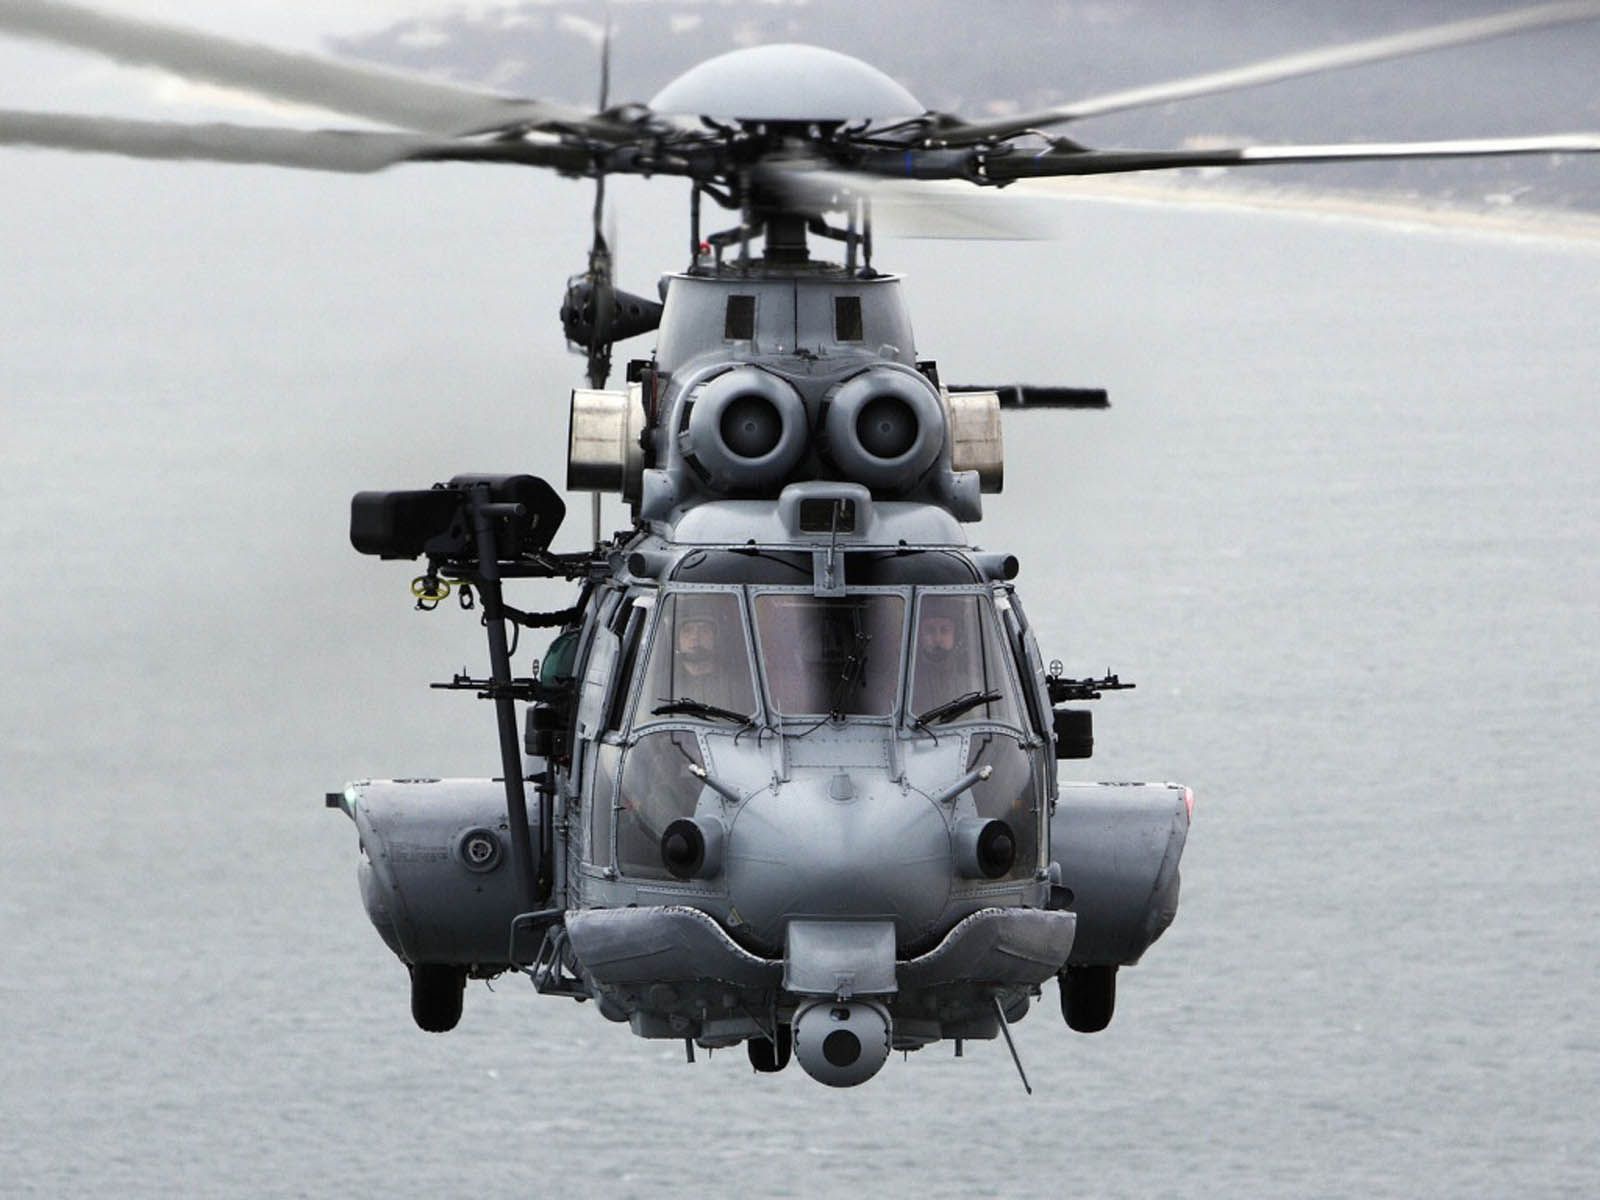 Tag Military Helicopter Wallpaper Image Photo Picture Wallpaper & Background Download